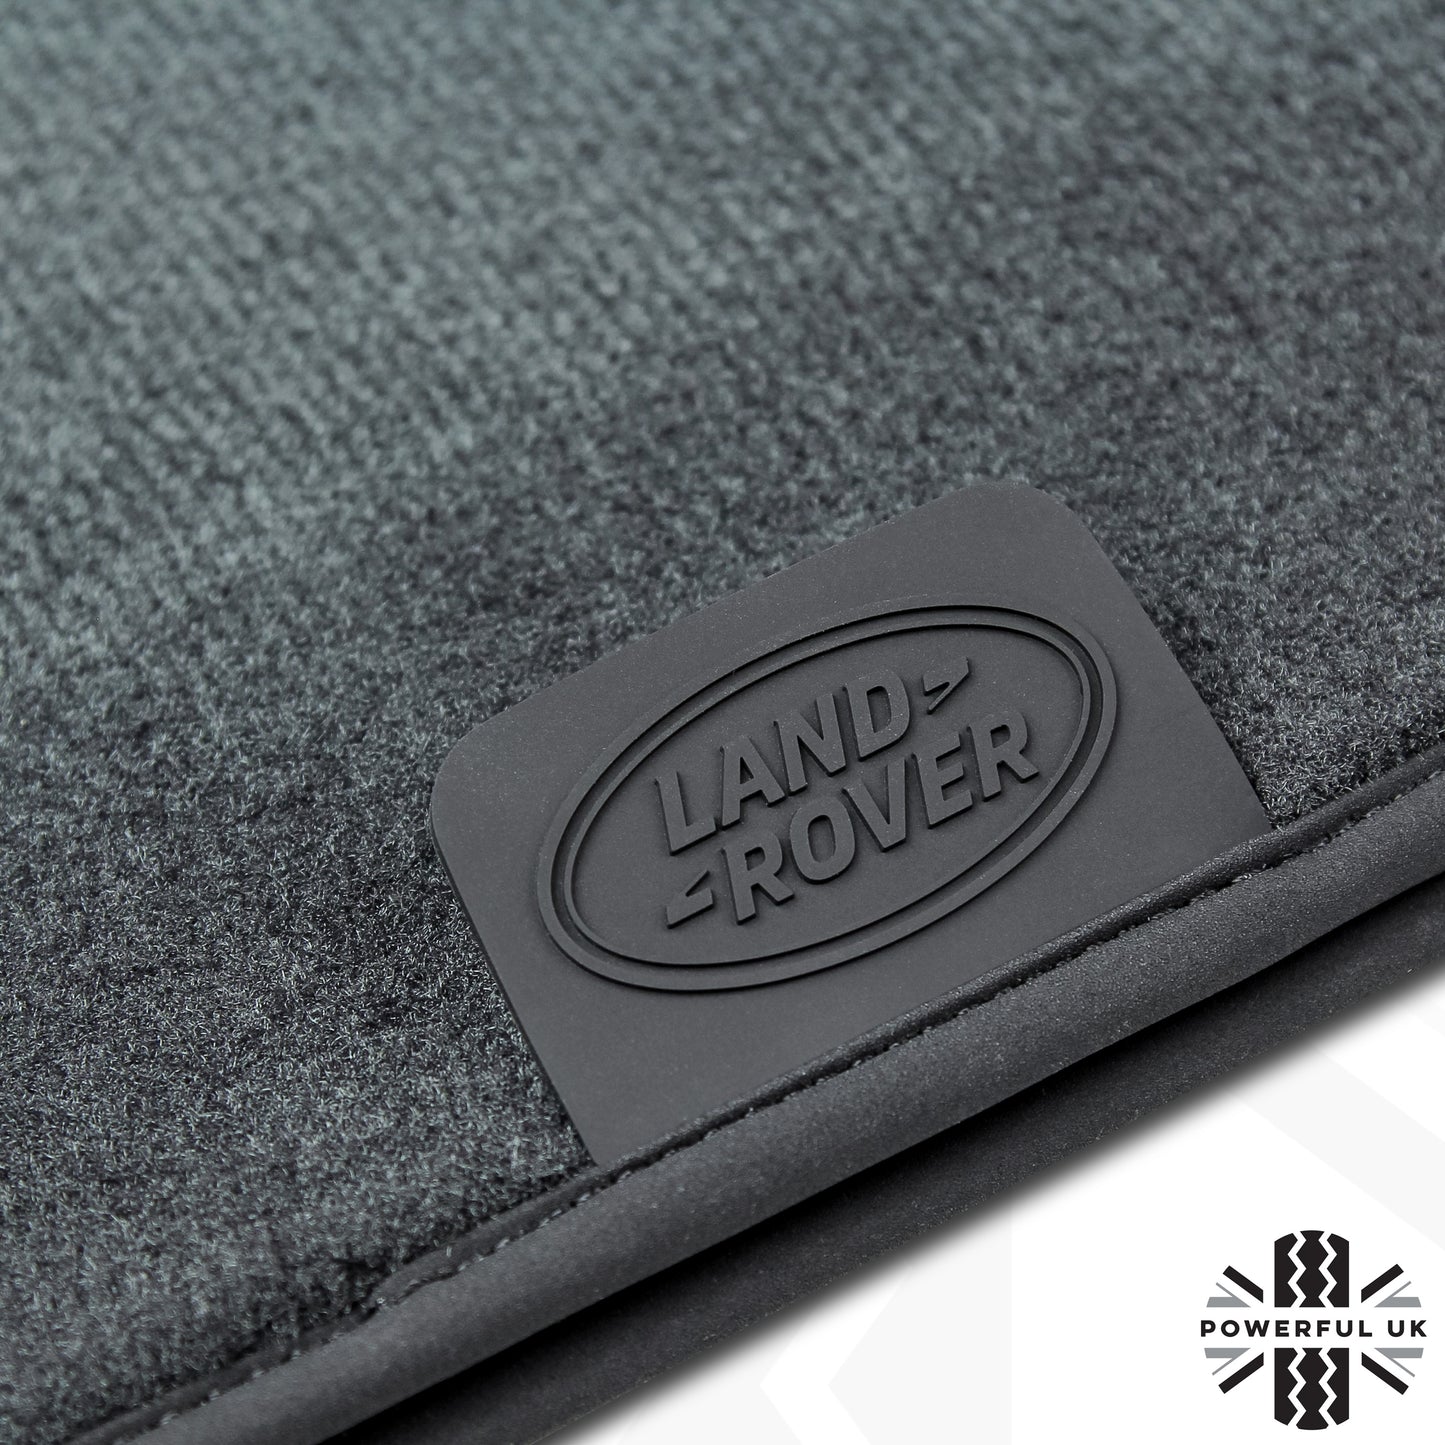 Loadspace Reversible Carpet Mat & Liner for Land Rover Discovery Sport